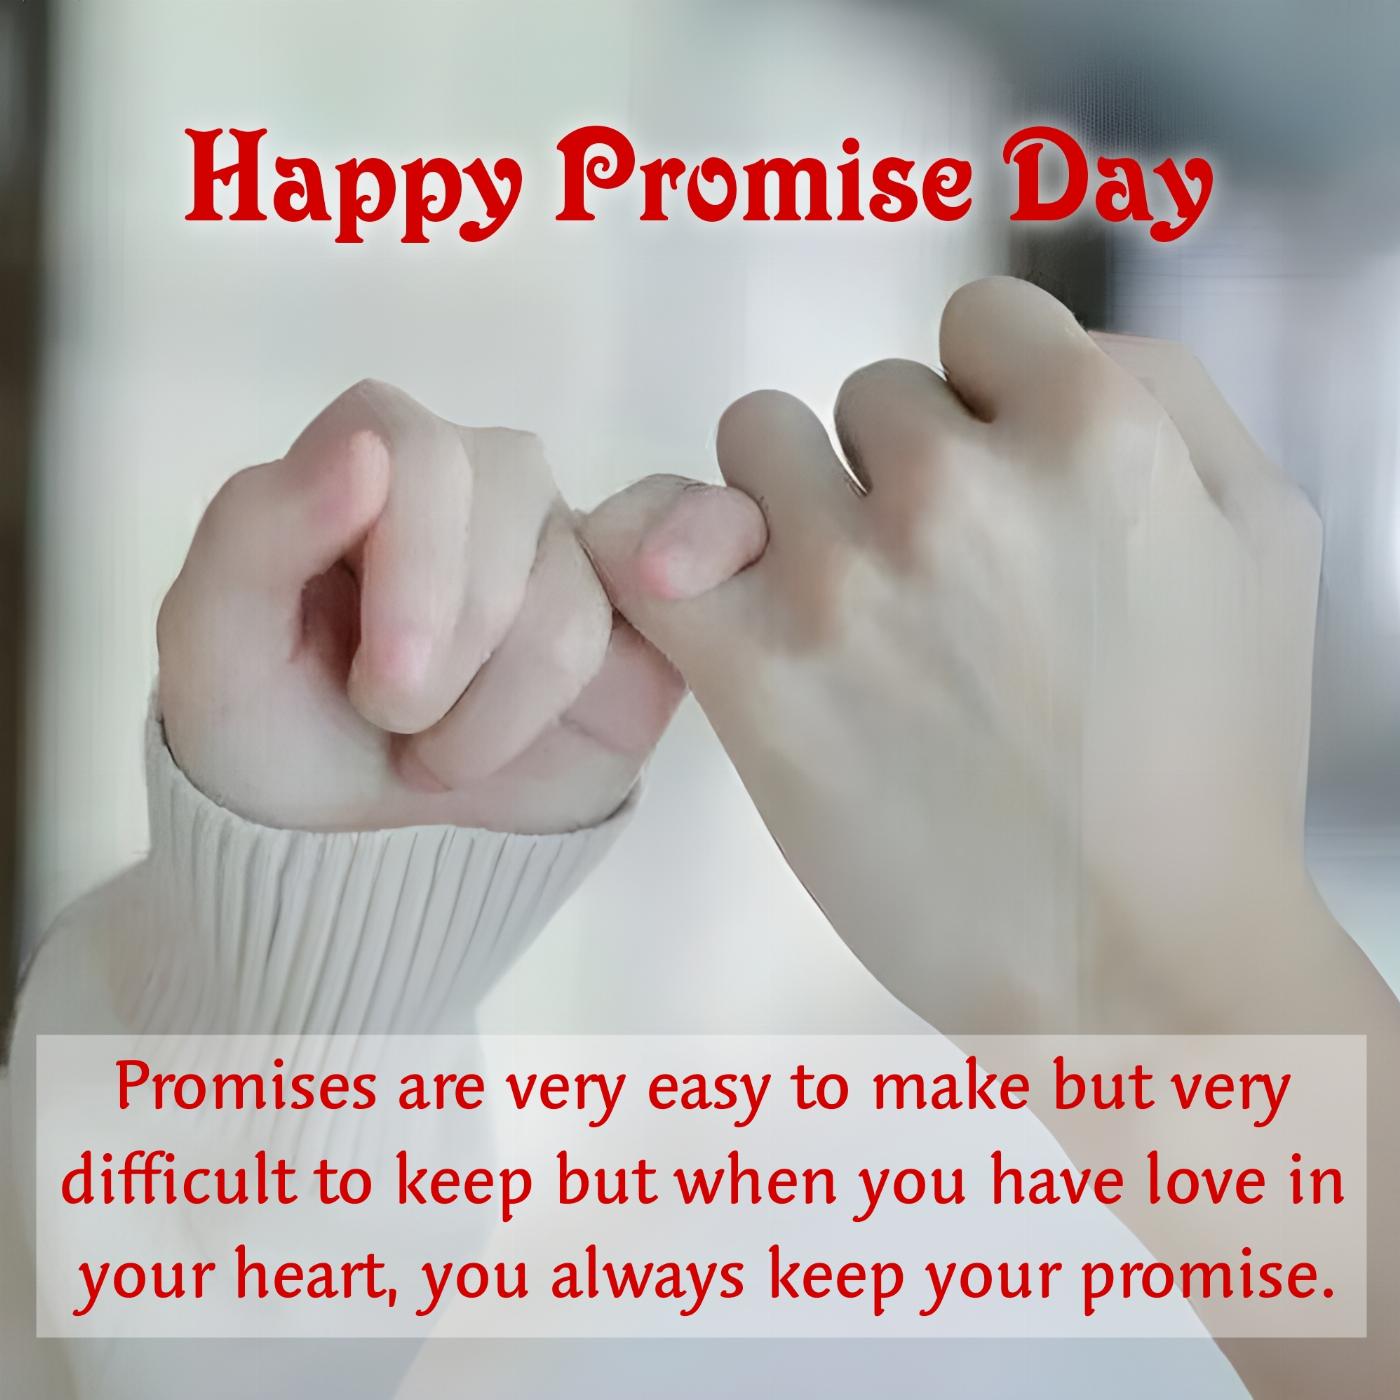 Promises are very easy to make but very difficult to keep